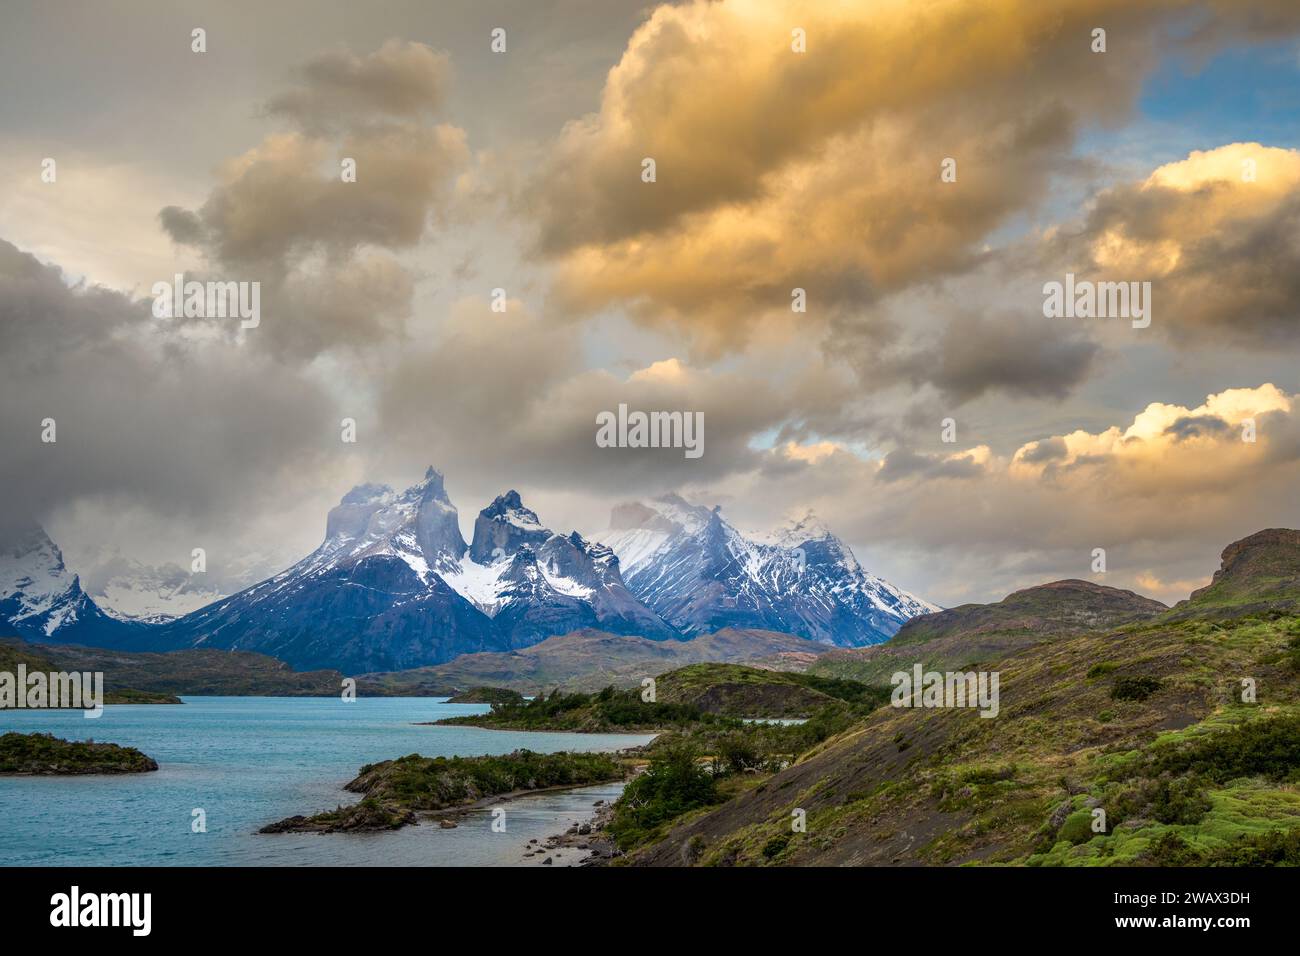 Lake Pehoe & Paine Massif bei Sonnenuntergang, Nationalpark Torres del Paine, Patagonien, Chile Stockfoto